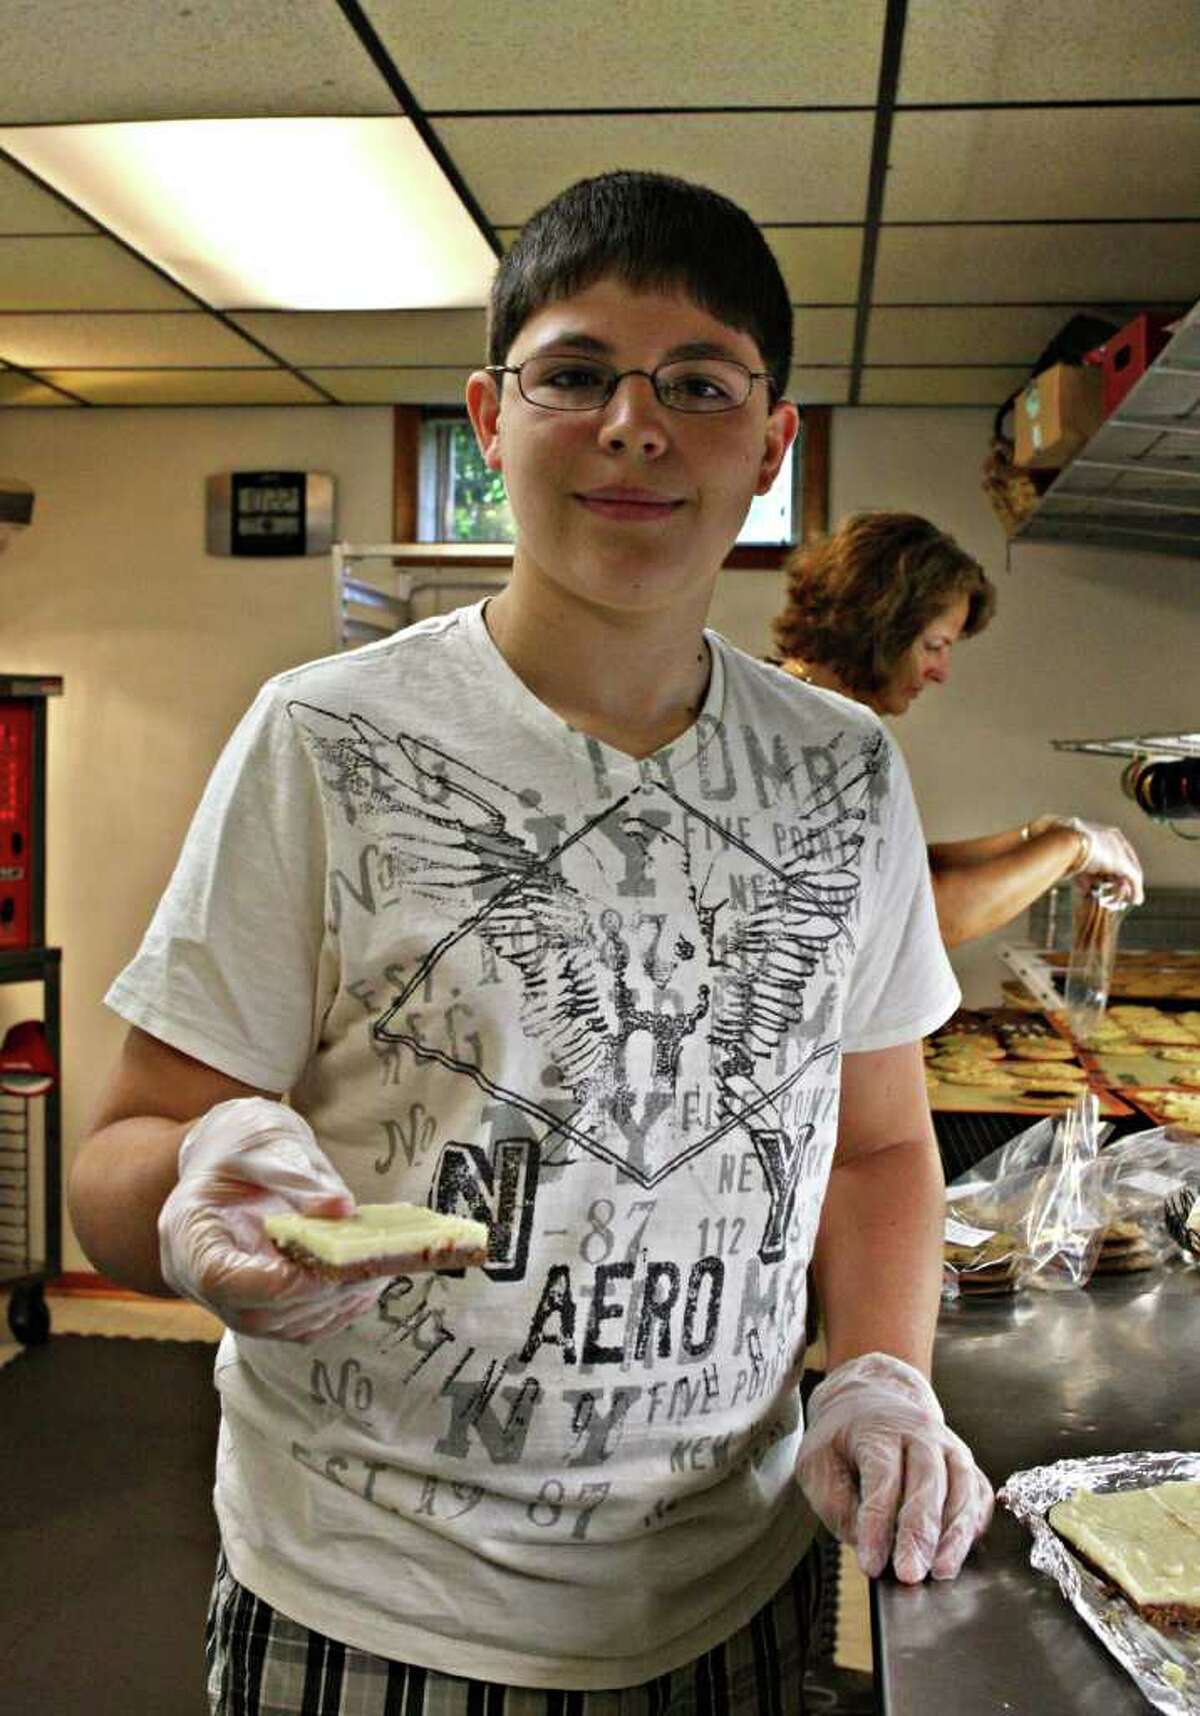 A mother/son operation at Saratoga Cookie Co.: Emily Damiano makes the cookies, while son A.J. Damiano runs a side business producing homemade fudge. (Krishna Hill / life@home)